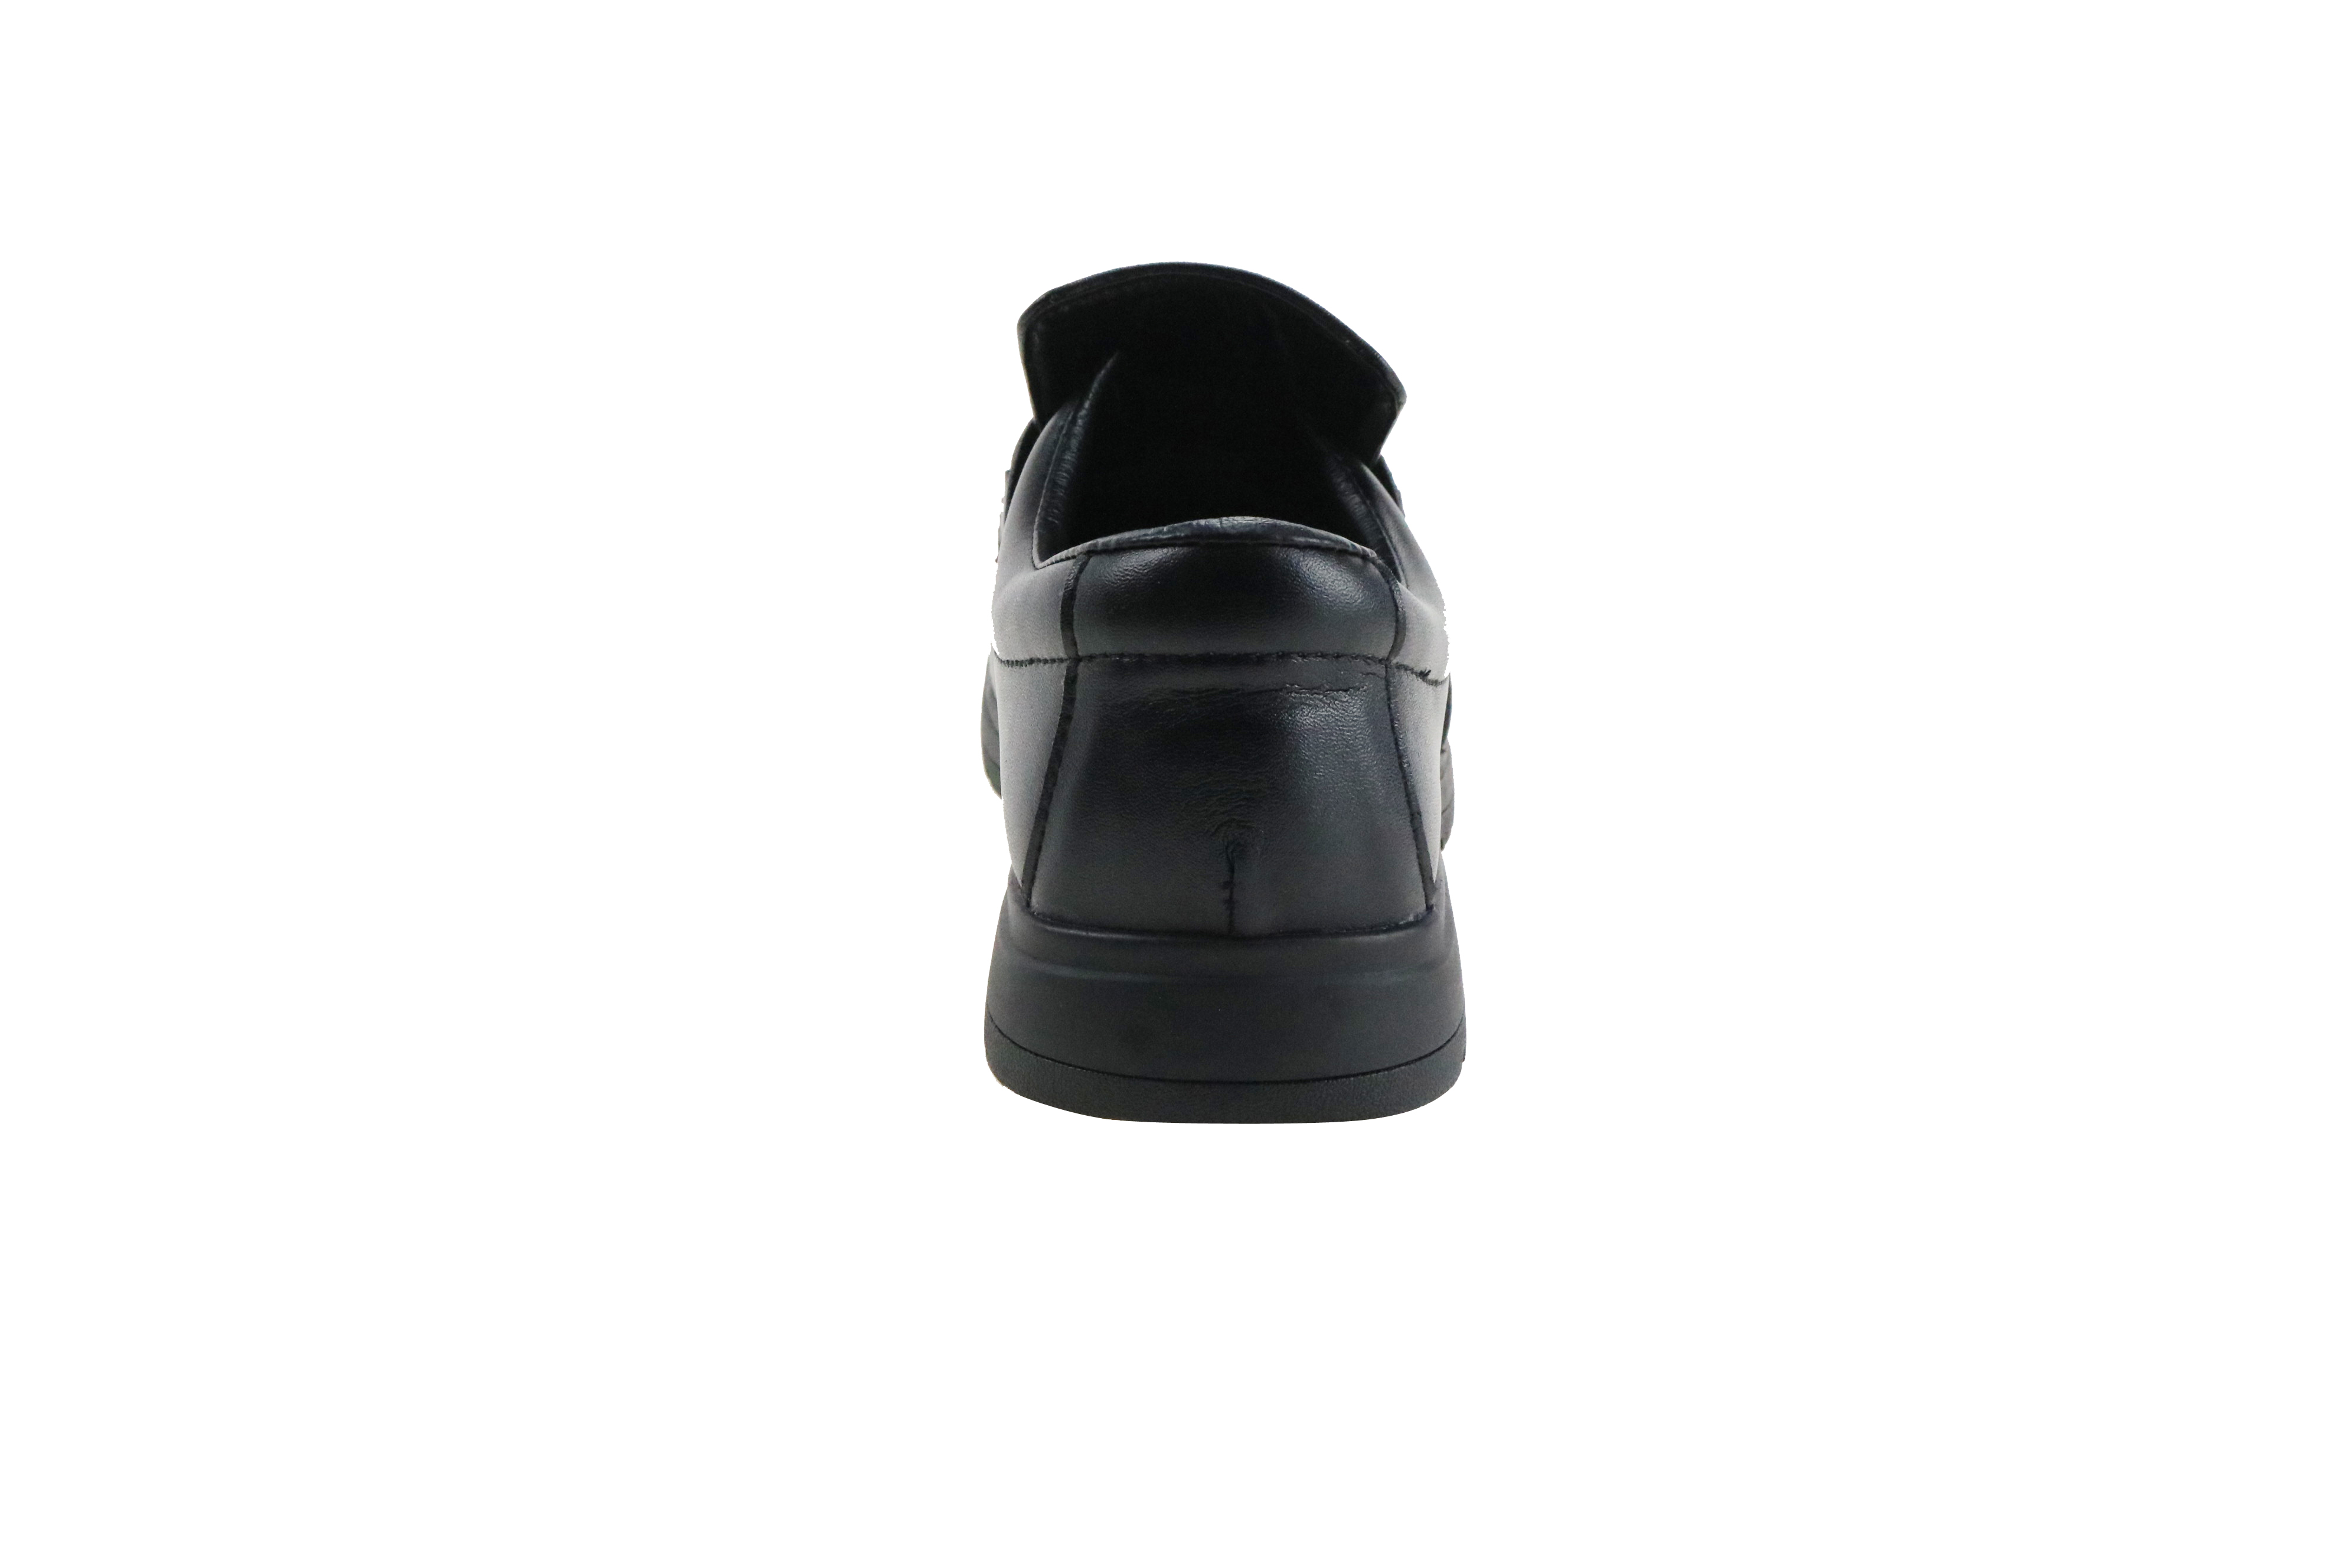 New Style Black Genuine Leather  Administrative Office Working Safety Shoes